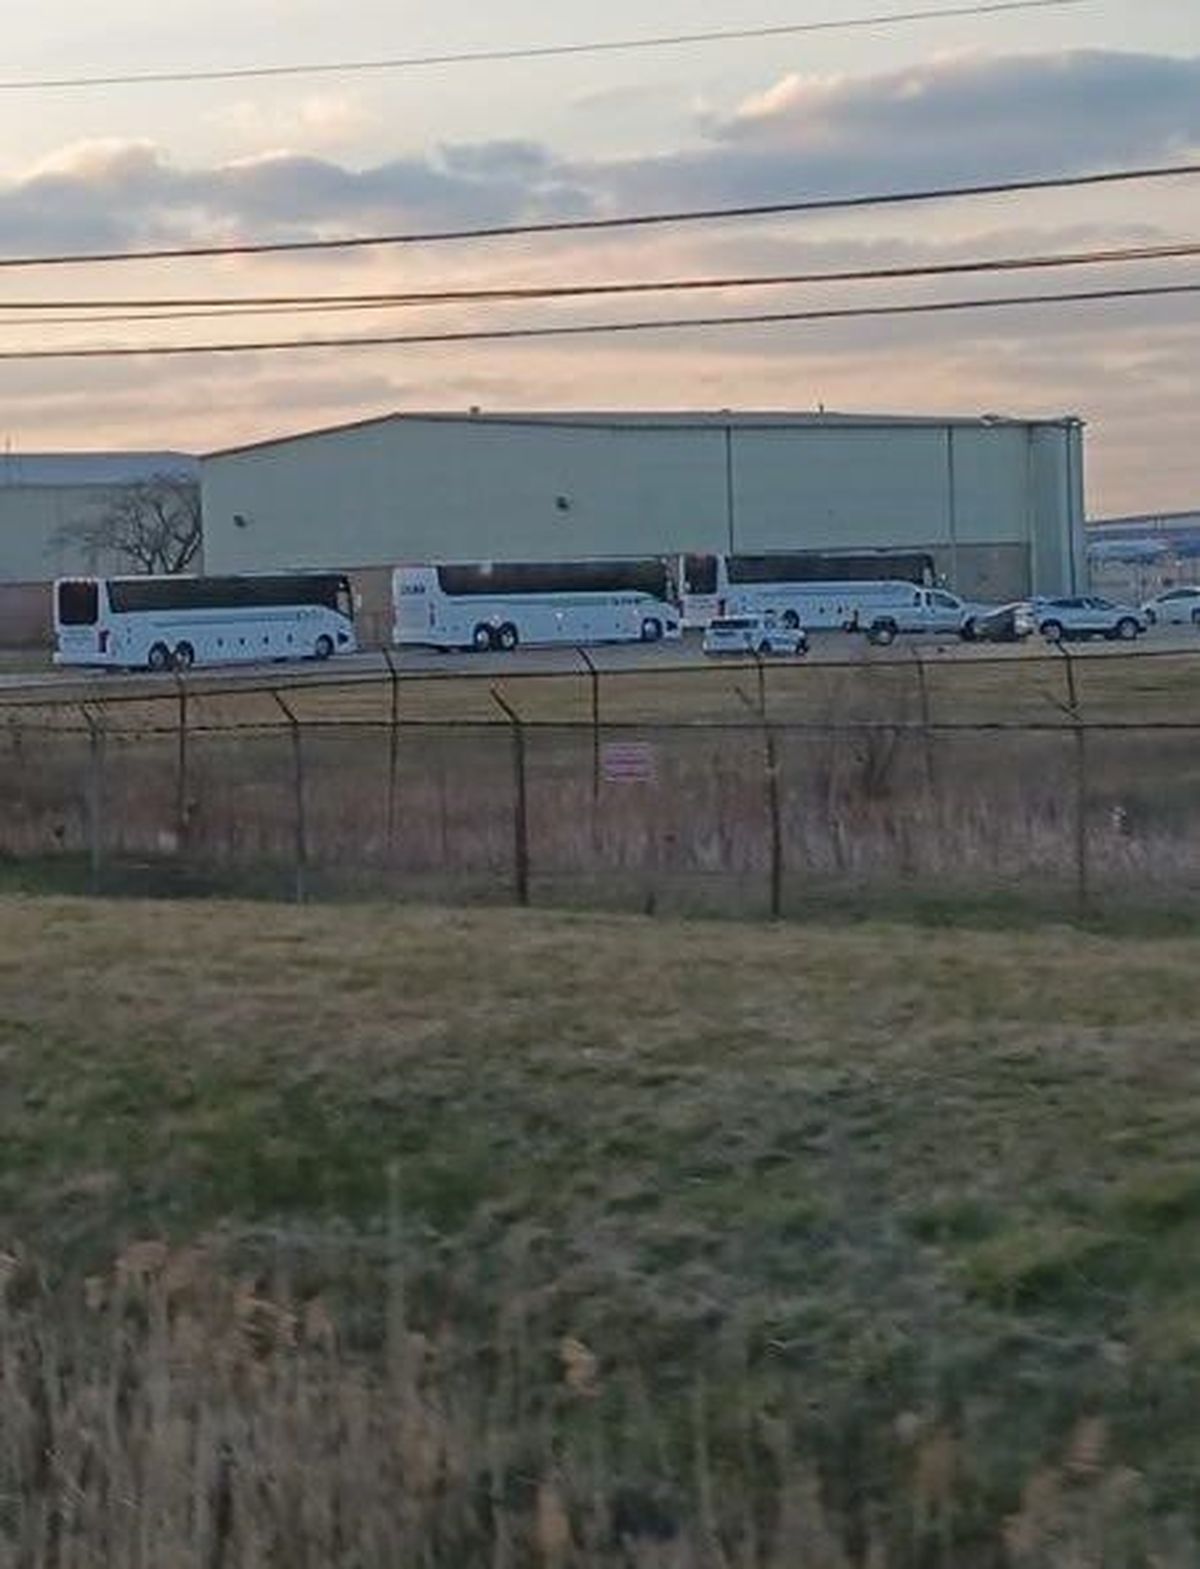 Picture taken by Michigan state Rep. Matt Maddock at a Detroit airport of three Gonzaga men’s basketball buses he claimed were full of “illegal invaders.” 